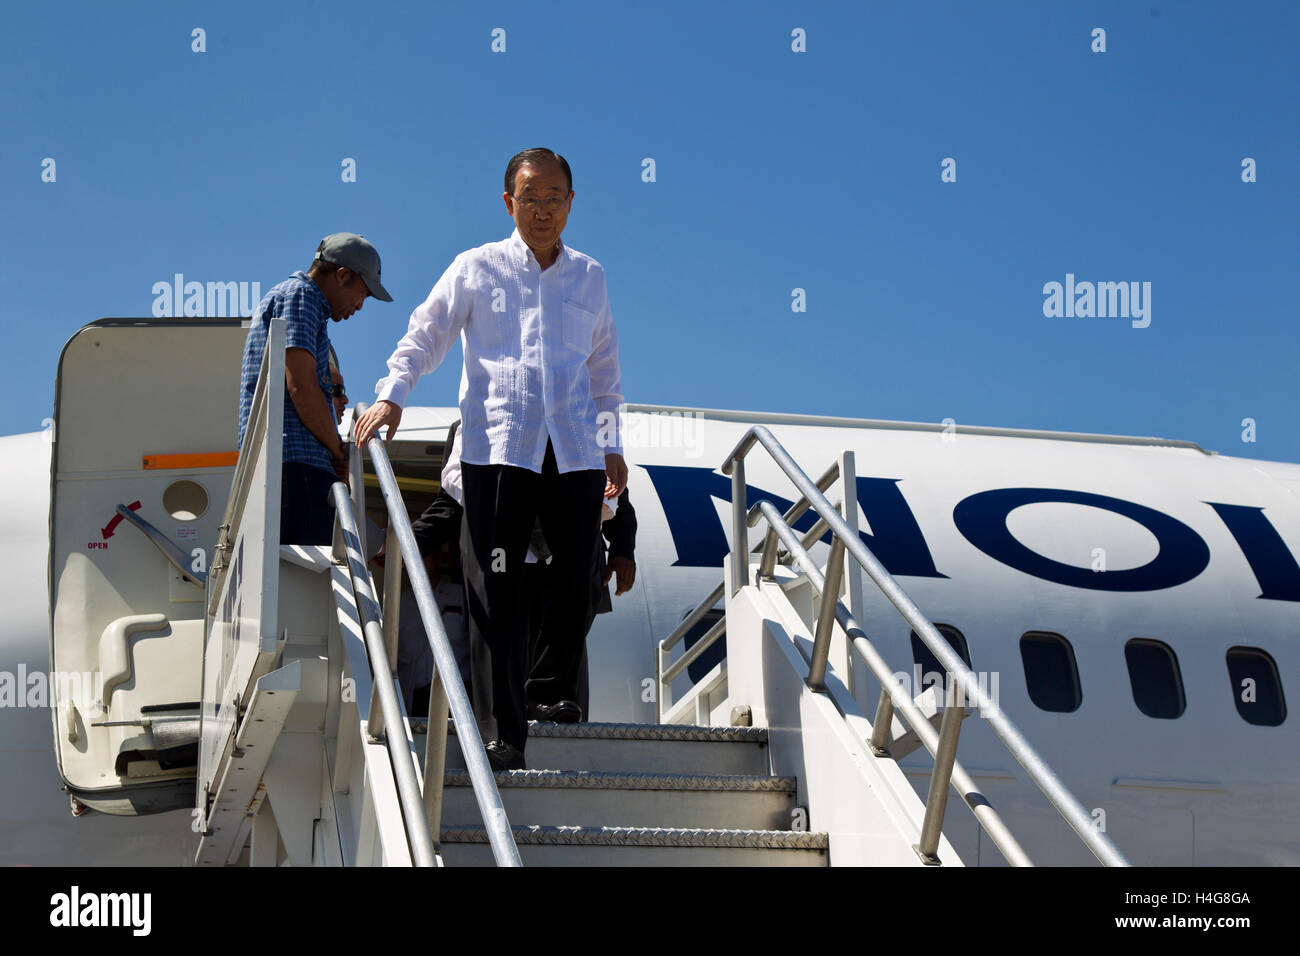 Port Au Prince, Haiti. 15th Oct, 2016. Image provided by the United Nations Stabilization Mission in Haiti (MINUSTAH) shows UN Secretary-General Ban Ki-moon (Front) descending from the plane upon his arrival at the Port-au-Prince International Airport, in Port-au-Prince, Haiti, on Oct. 15, 2016. Ban arrived on Saturday in Haiti to make a tour to the areas hardest hit by Hurricane Matthew and met with government officials and humanitarian organizations working in the country. © MINUSTAH/Xinhua/Alamy Live News Stock Photo